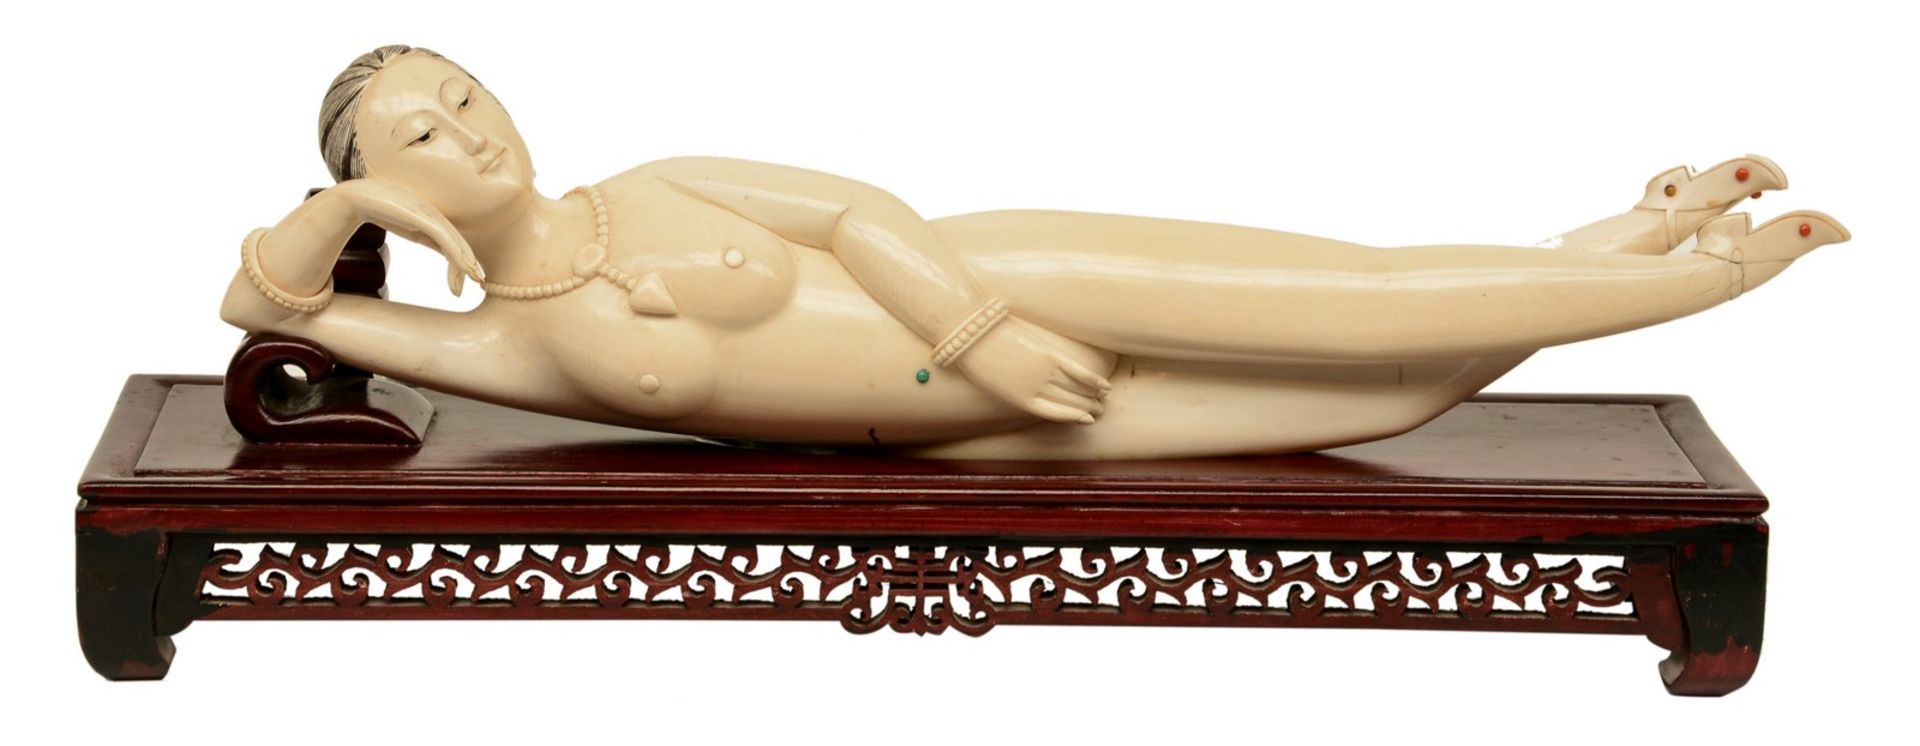 A Chinese ivory Medicine Lady,ivory with coloured engraving decoration with semi-precious stones